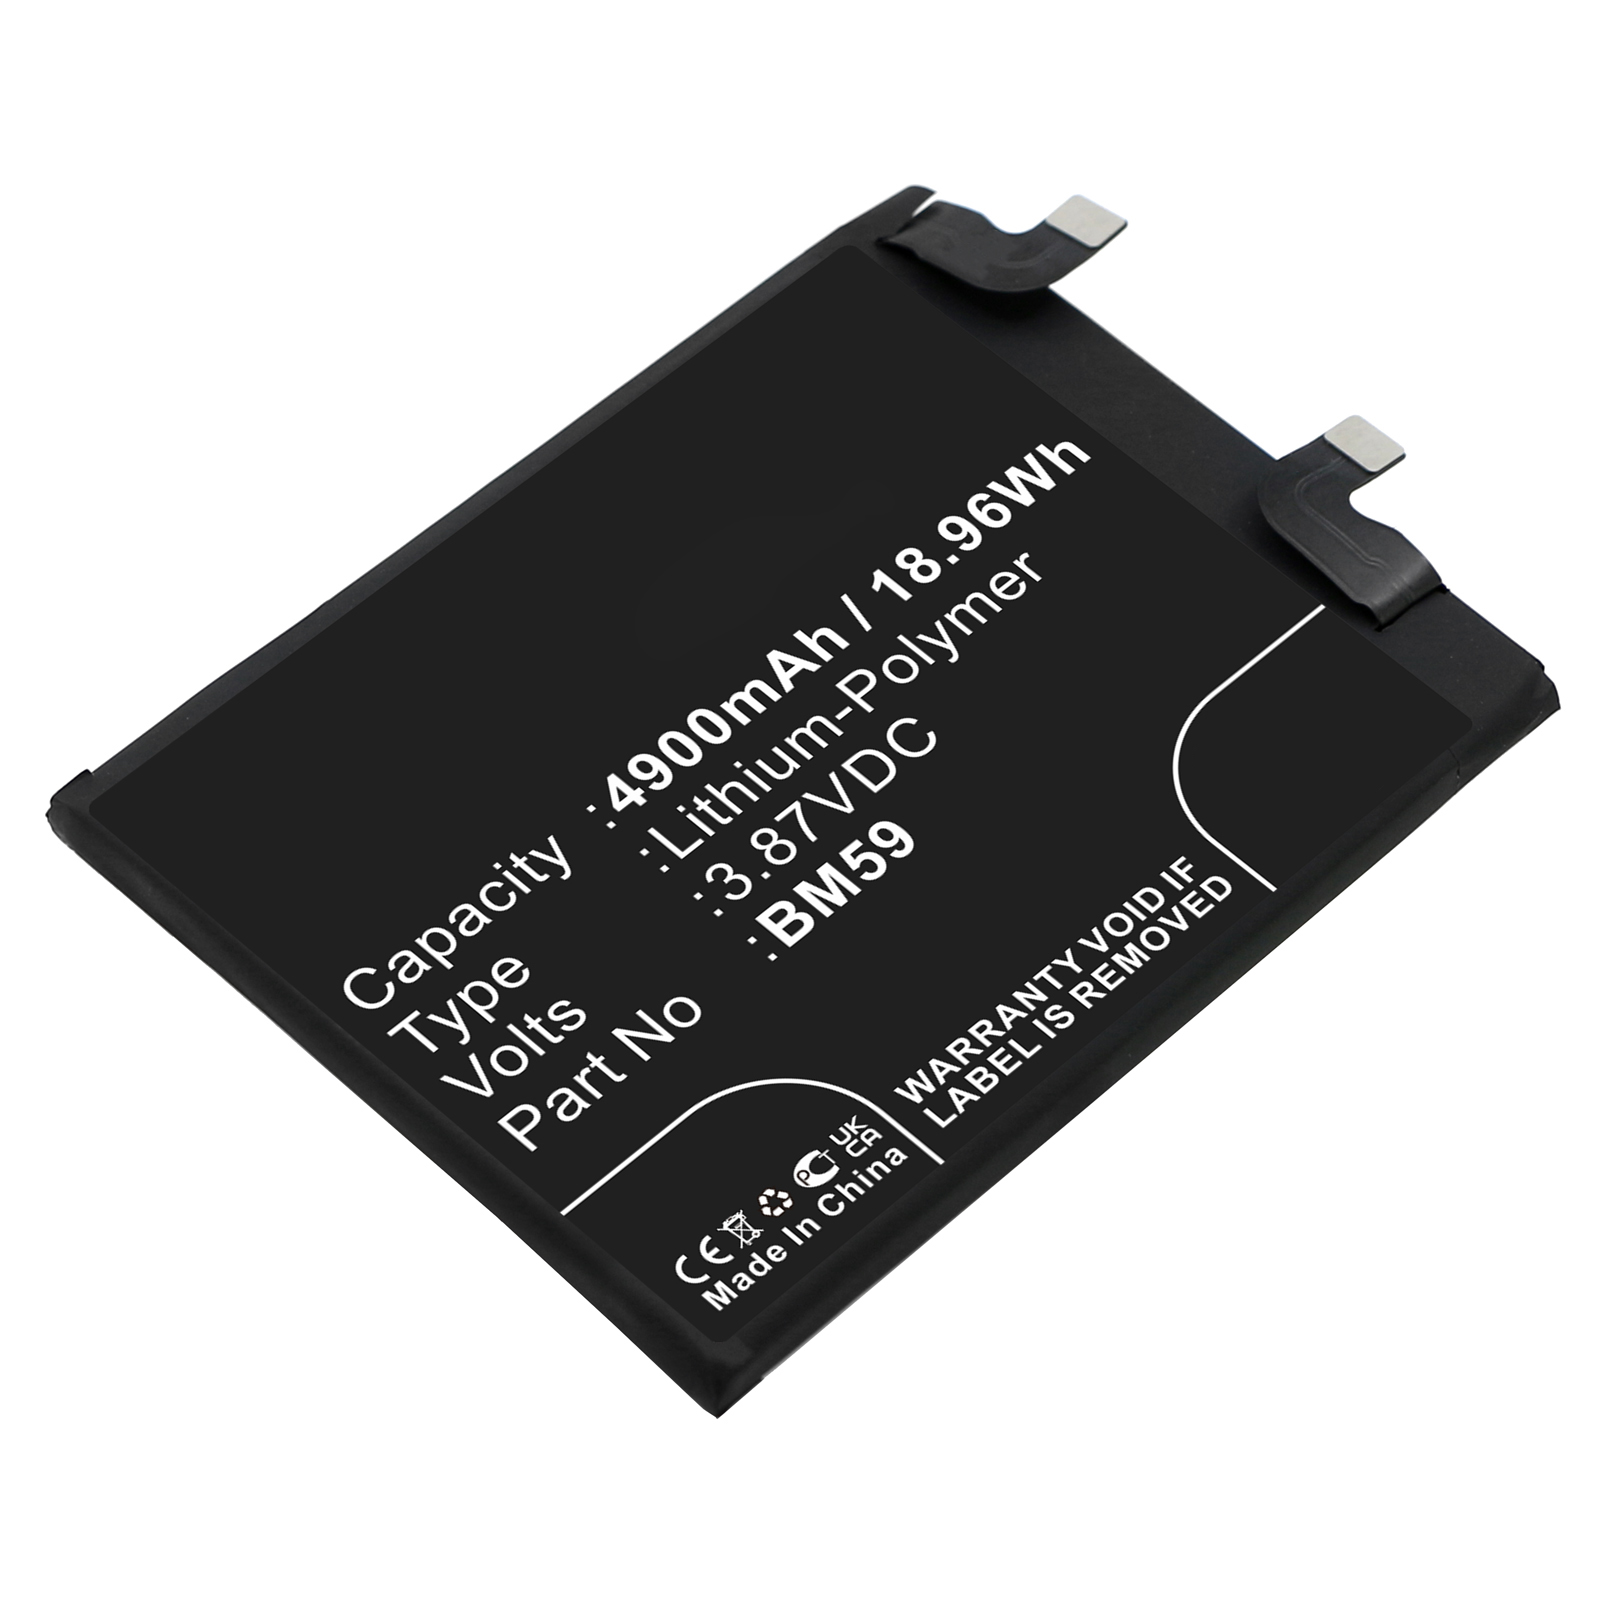 Synergy Digital Cell Phone Battery, Compatible with Xiaomi BM59 Cell Phone Battery (Li-Pol, 3.87V, 4900mAh)